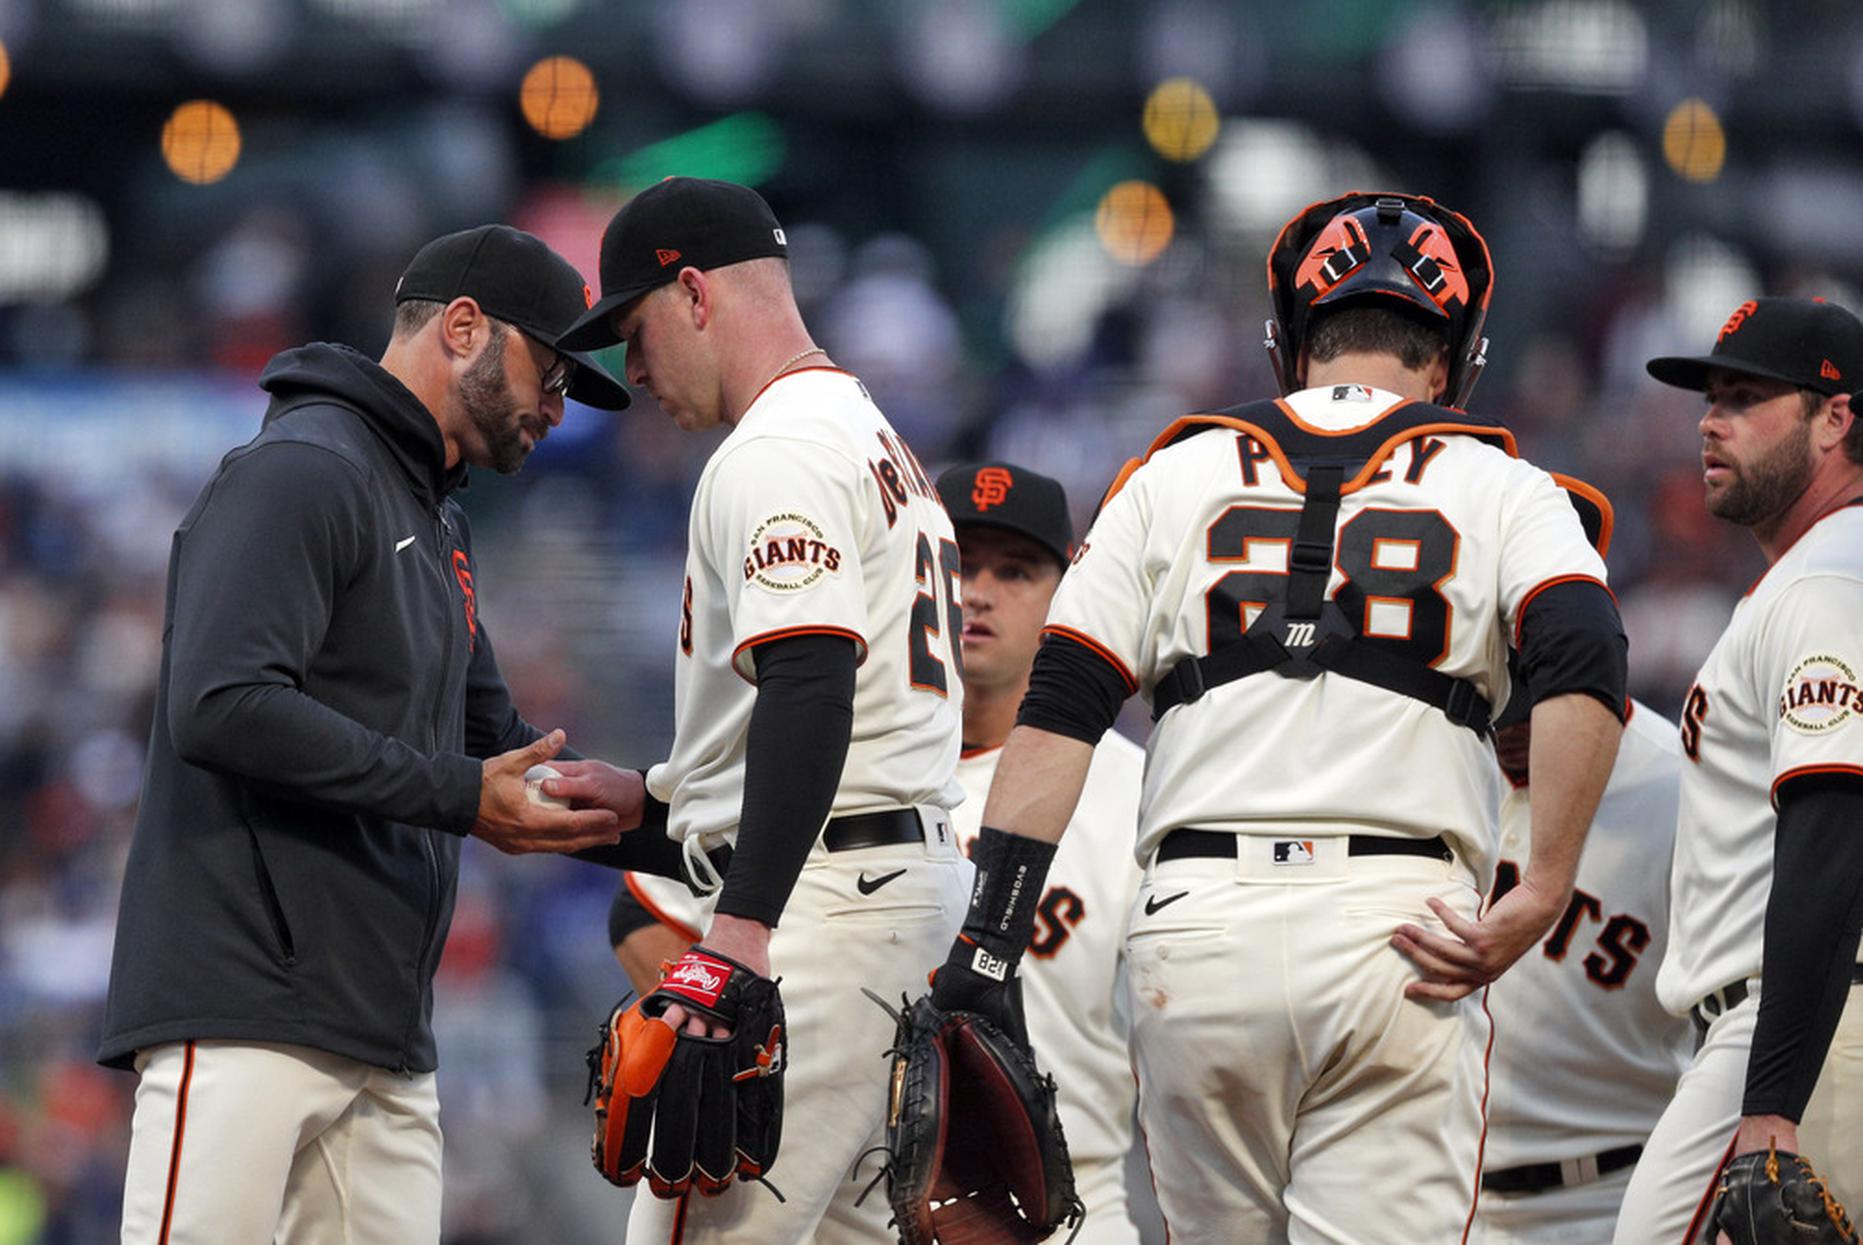 Giants rotation helped build MLB’s best record, but faces stretchrun